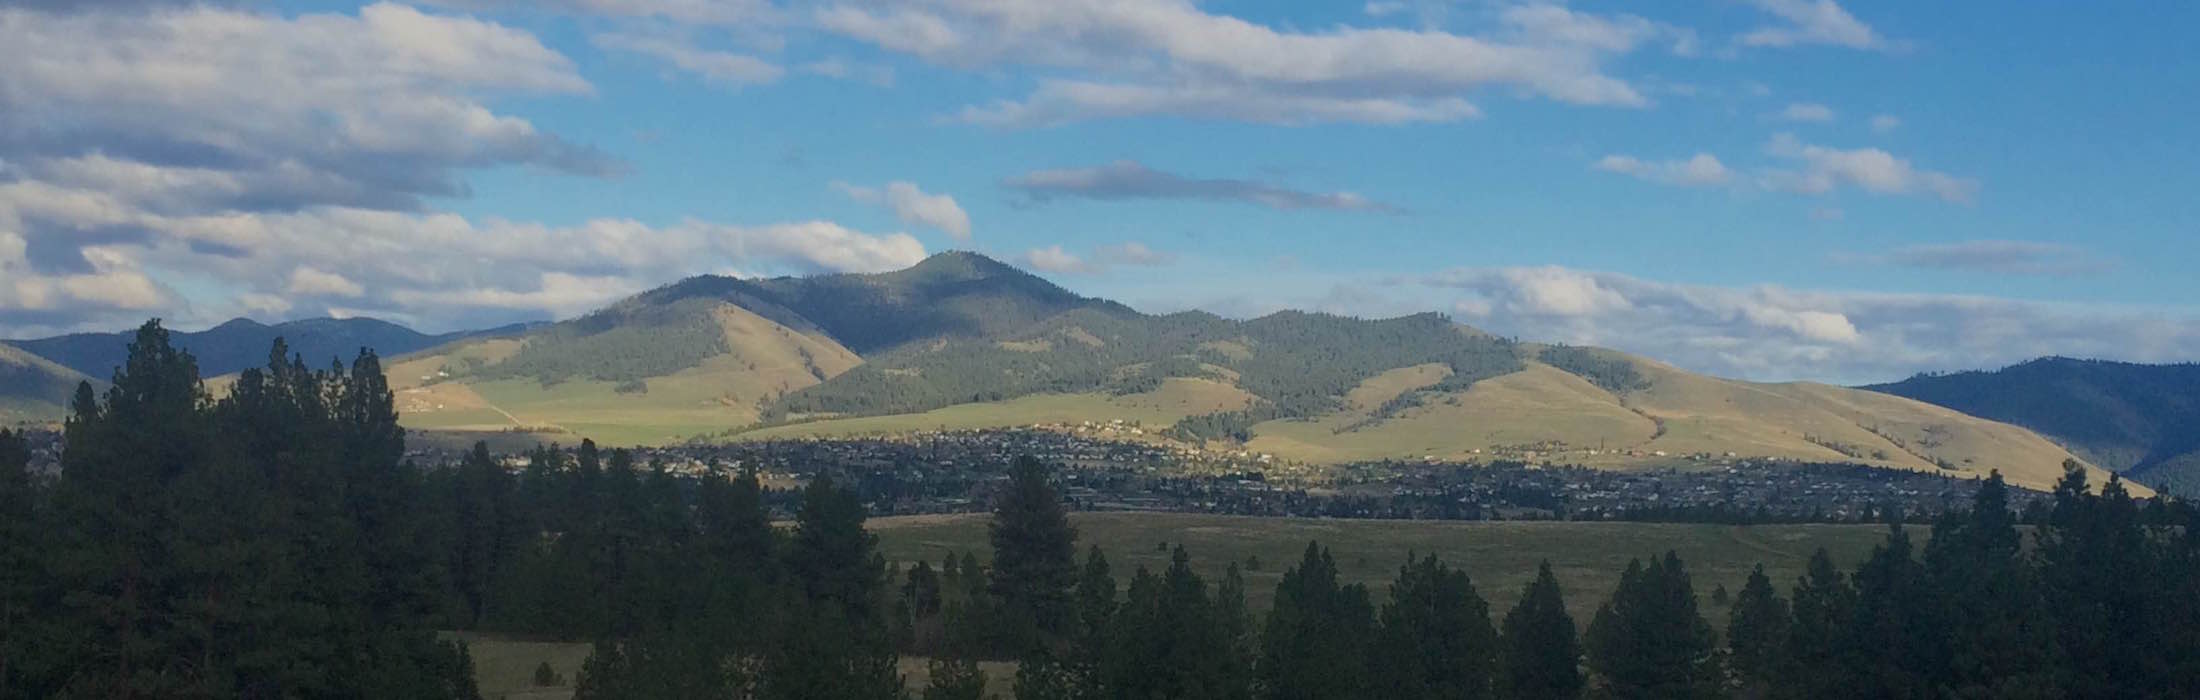 Missoula named one of America's Favorite Mountain Towns